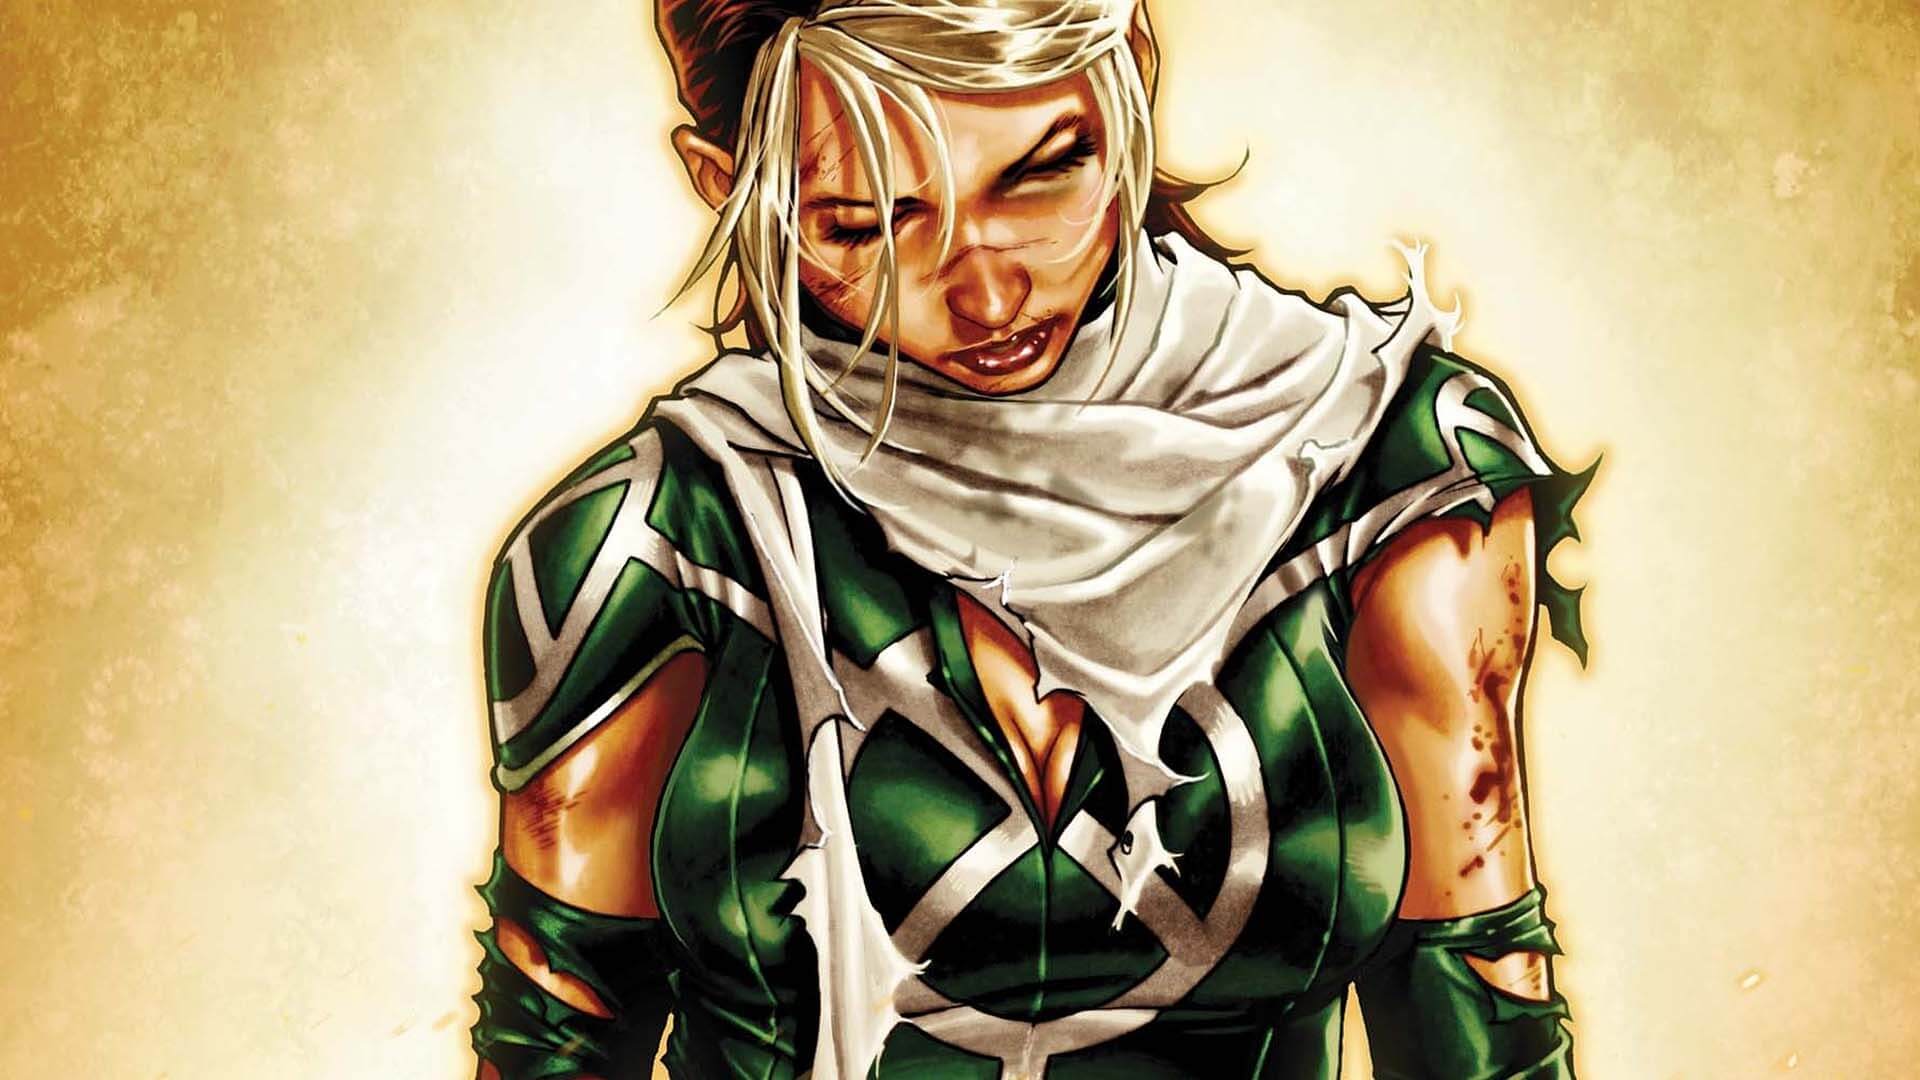 Rogue with her head bowed after a rough battle that has left her clothes torn and her arms and face but and bloody